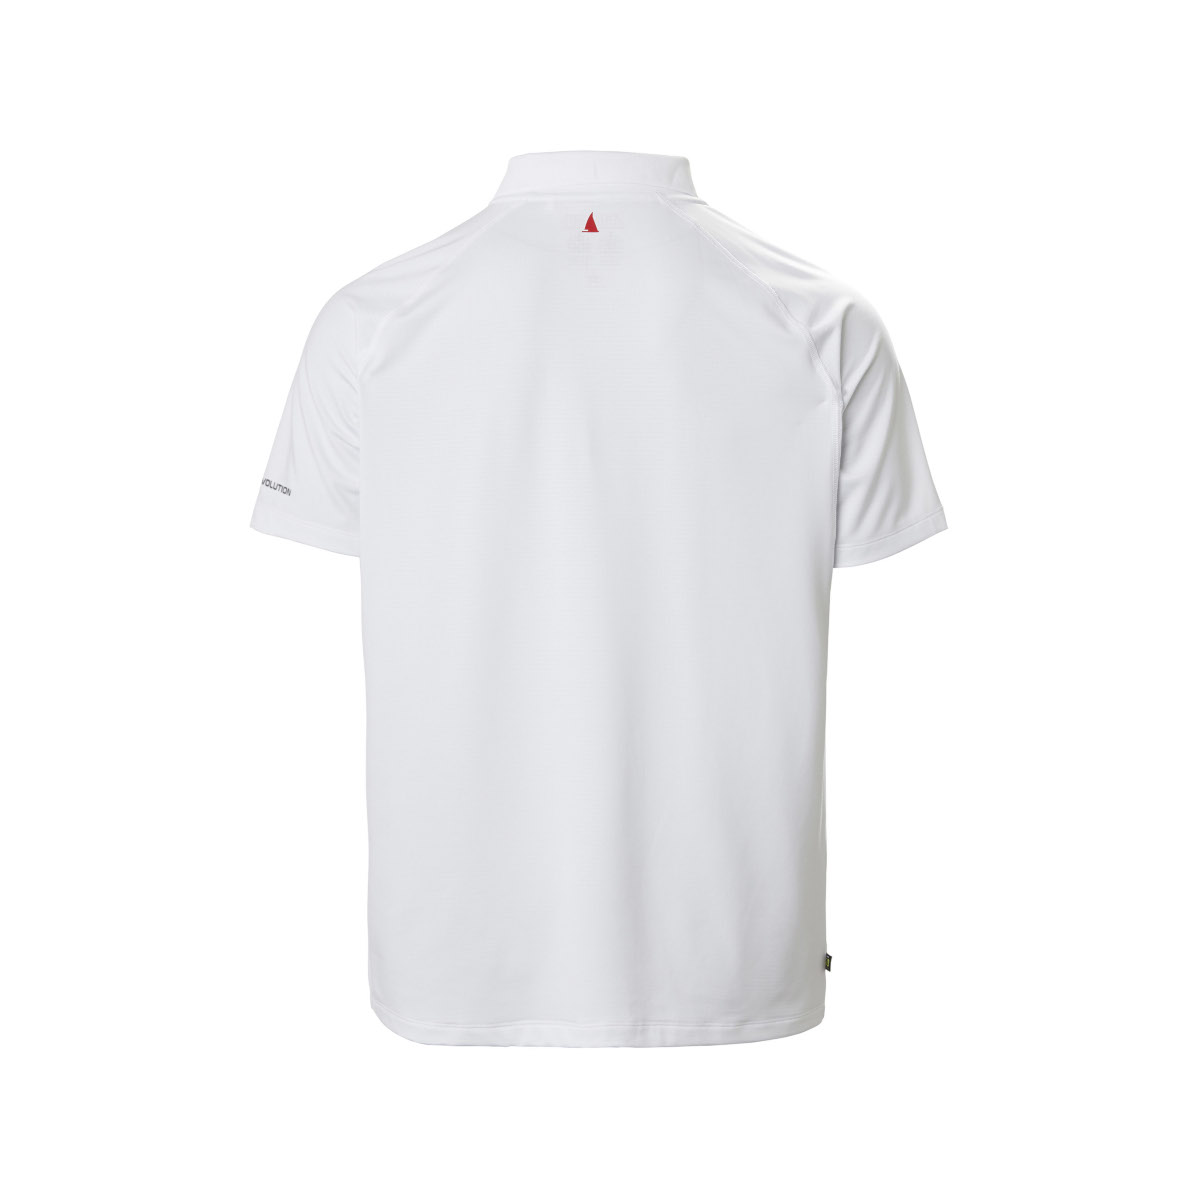 Musto Evolution Sunblock polo 2.0 homme blanc, taille S